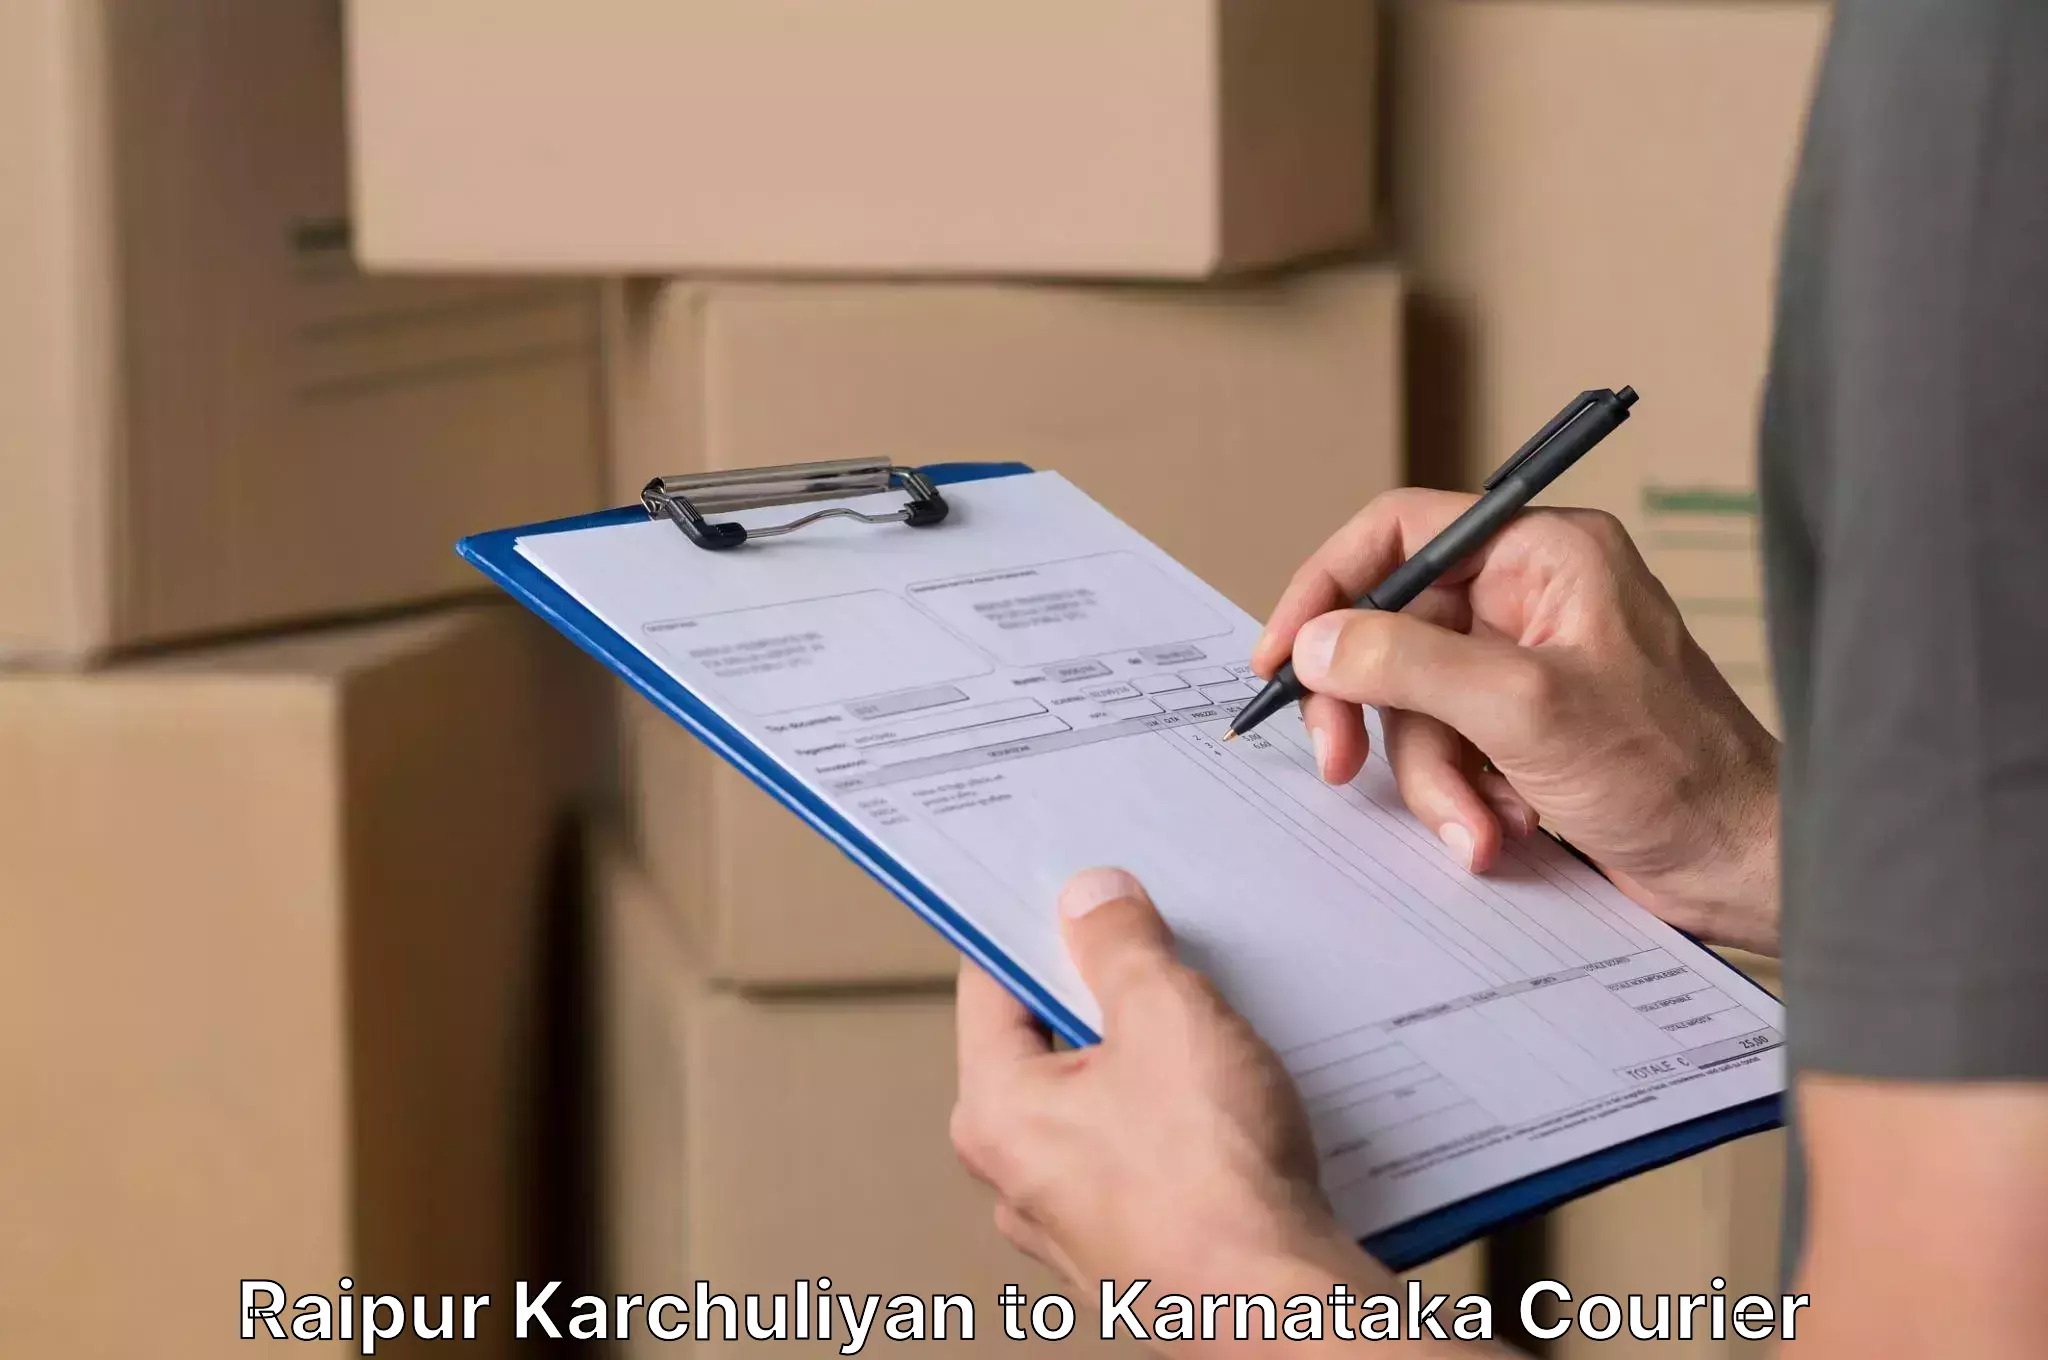 Hassle-free relocation Raipur Karchuliyan to Challakere